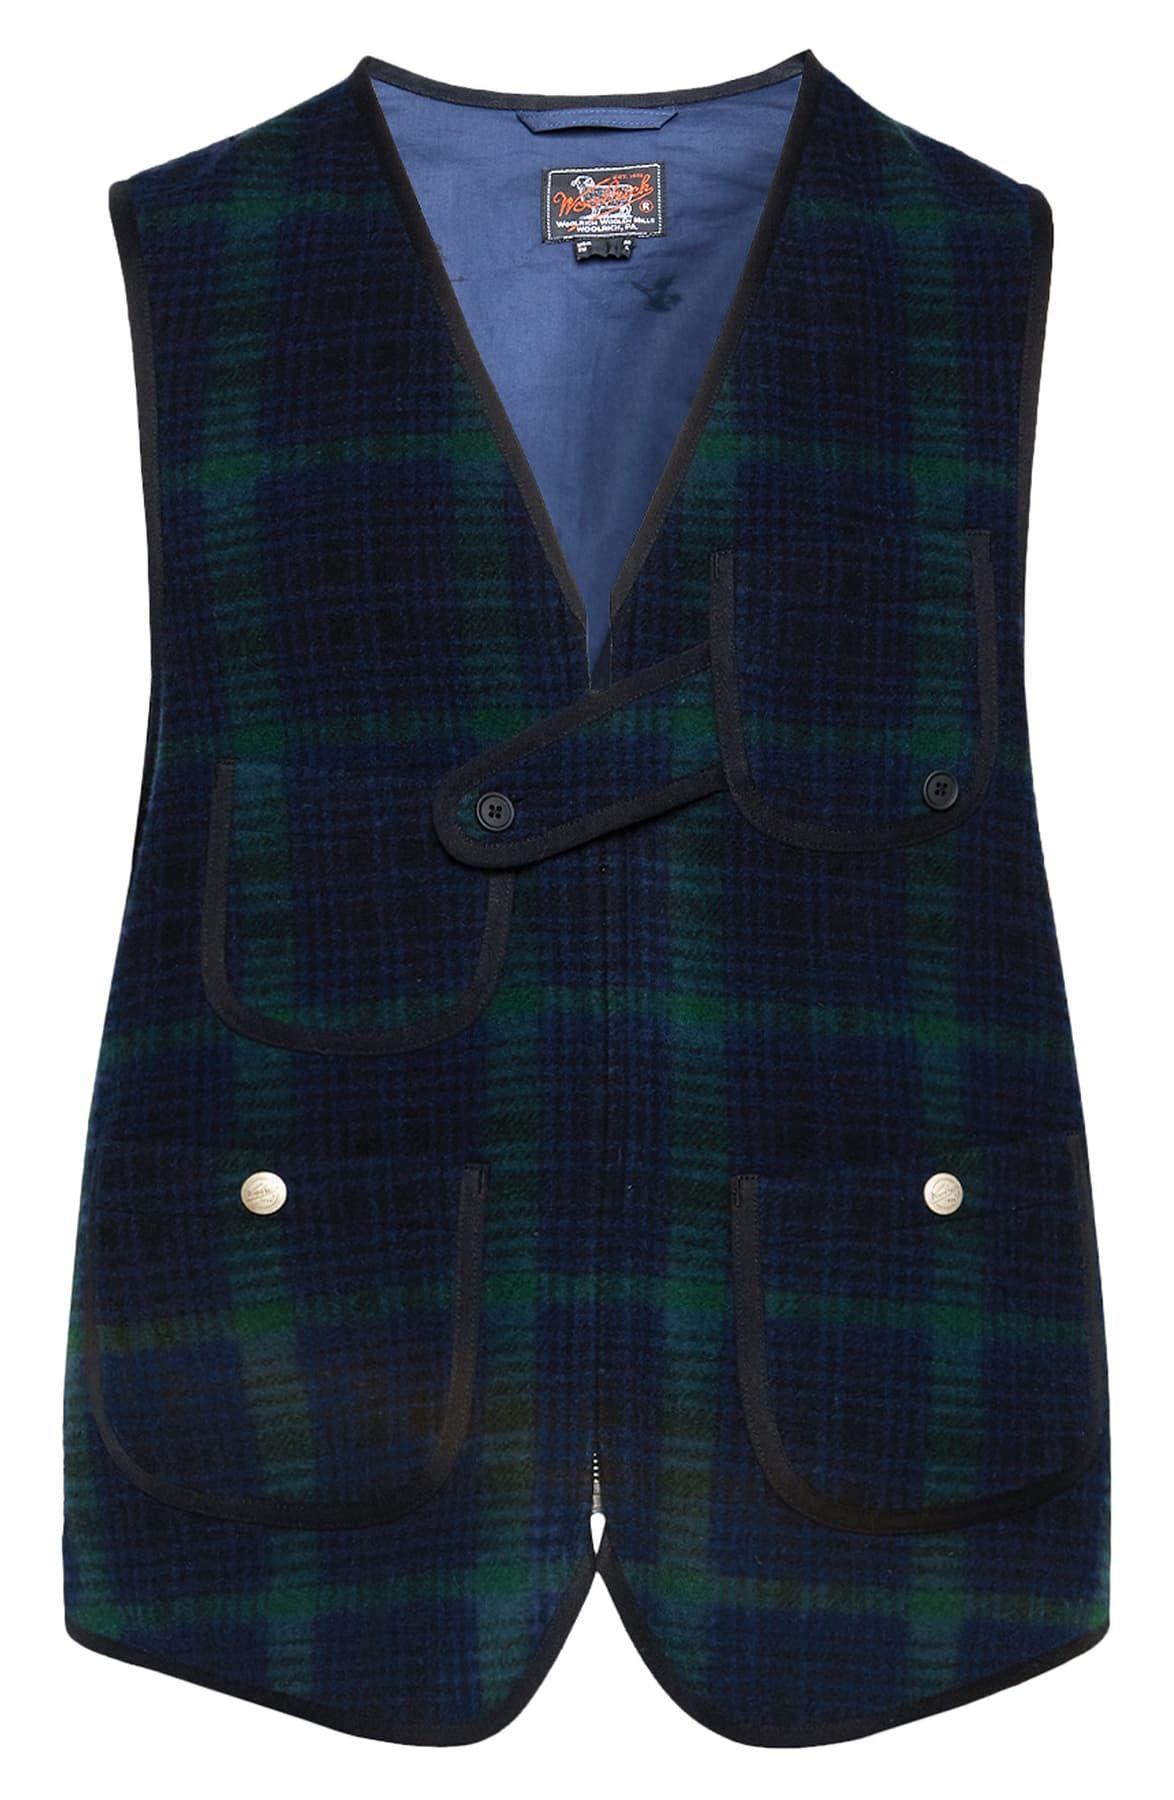 Woolrich Wool Plaid Hunting Vest in Blue for Men - Lyst